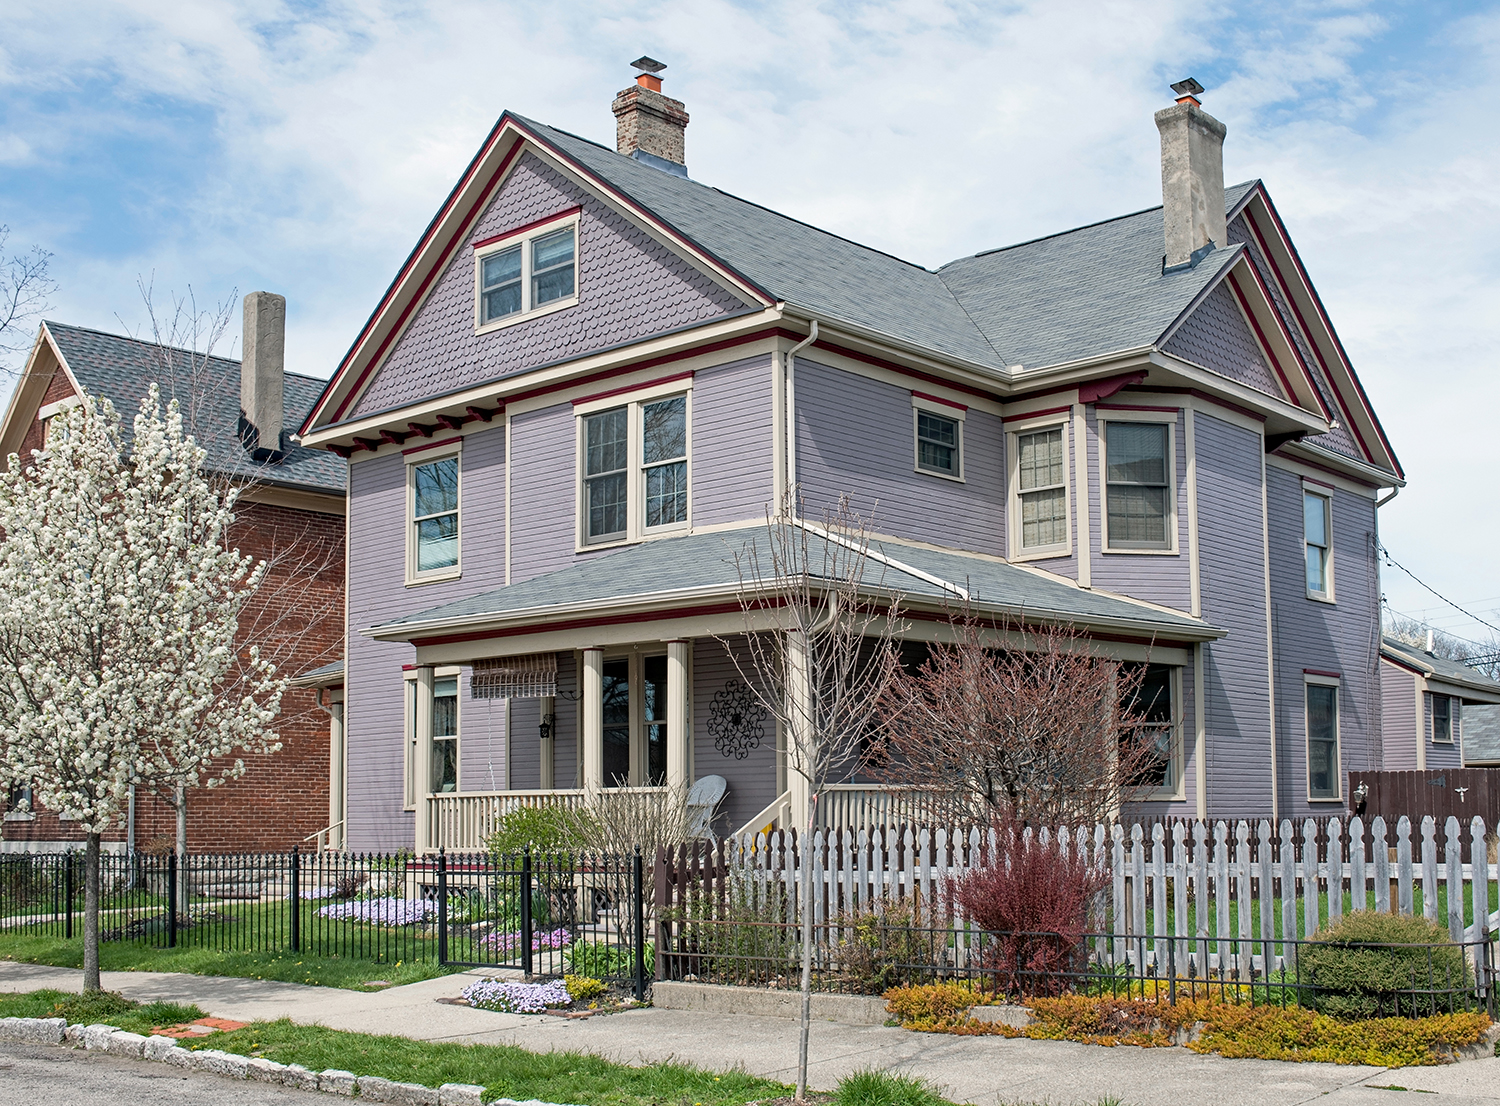 Exterior painting service for an old house with purple paint and beige trim